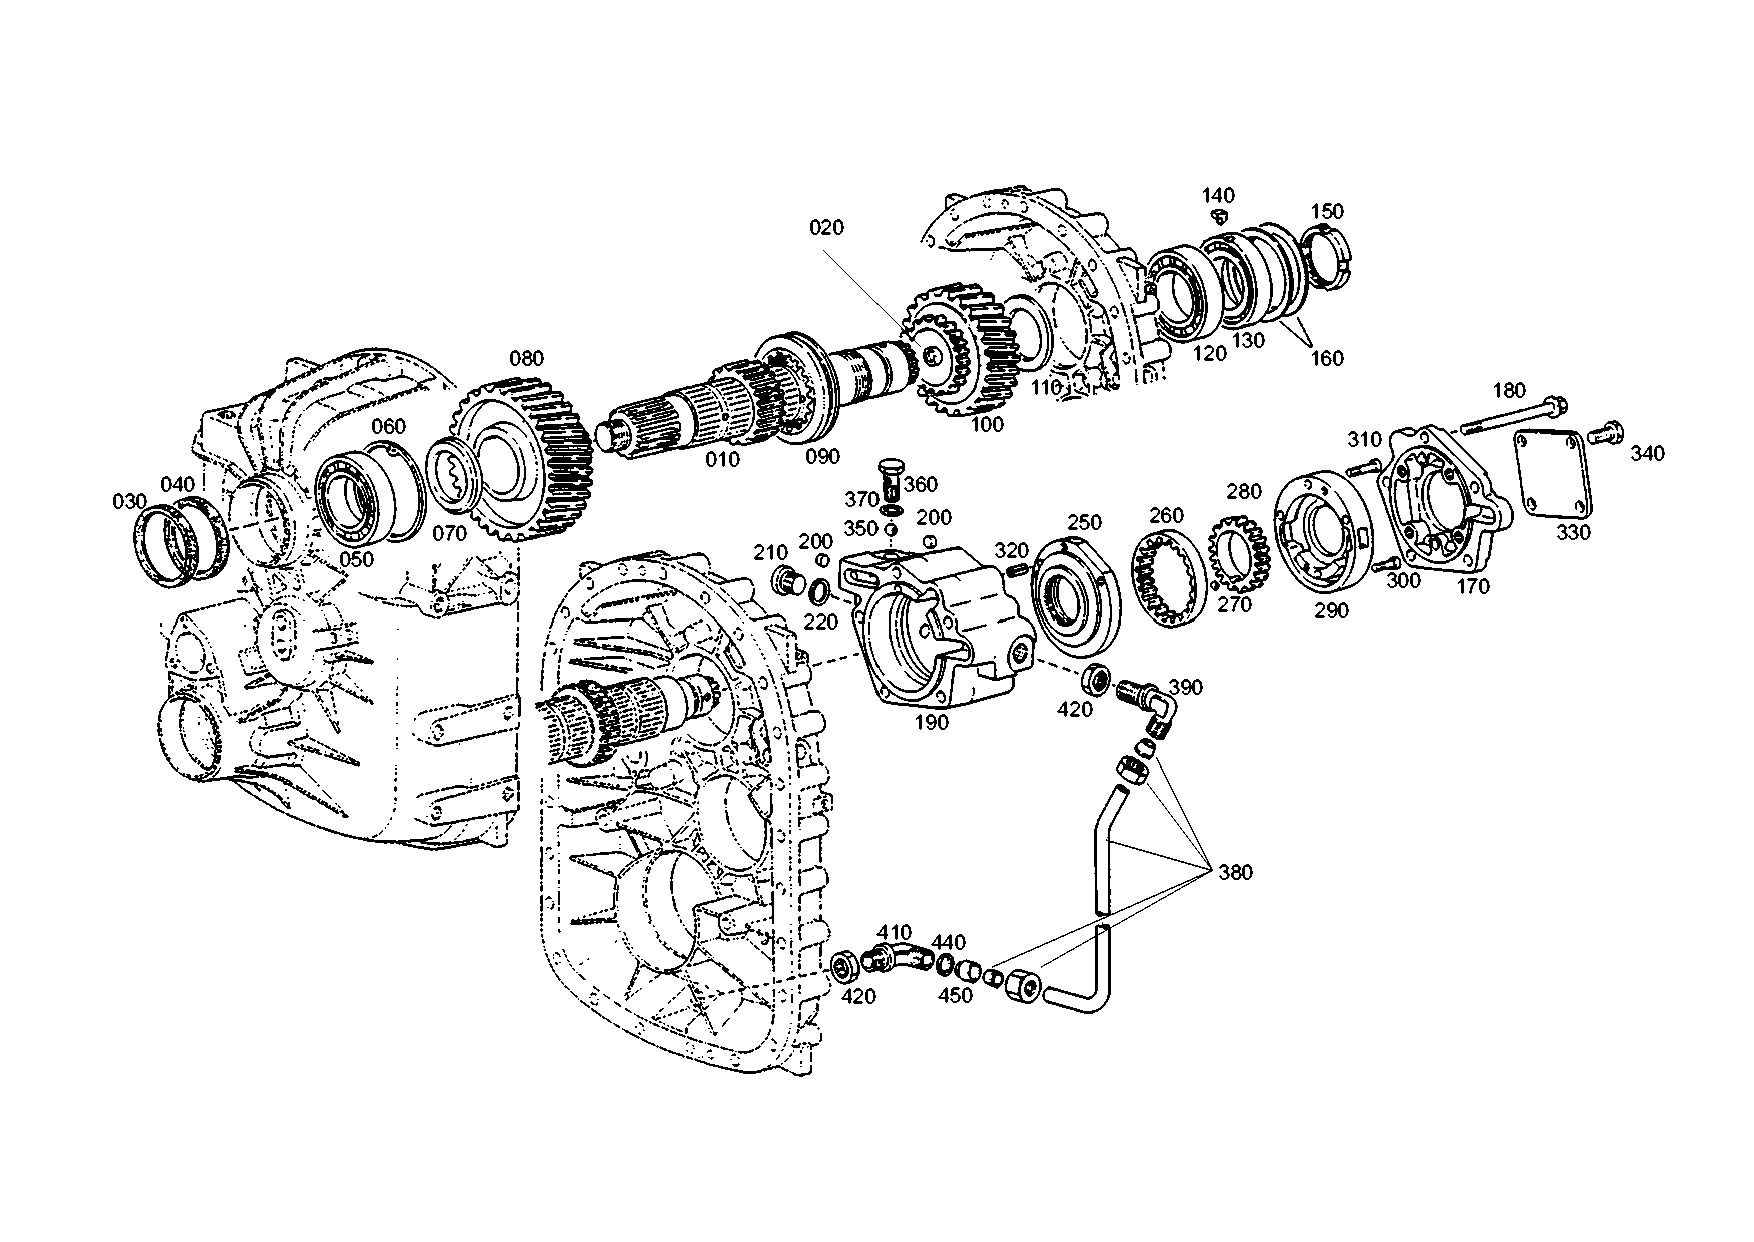 drawing for MARMON Herring MVG751055 - INPUT GEAR (figure 1)